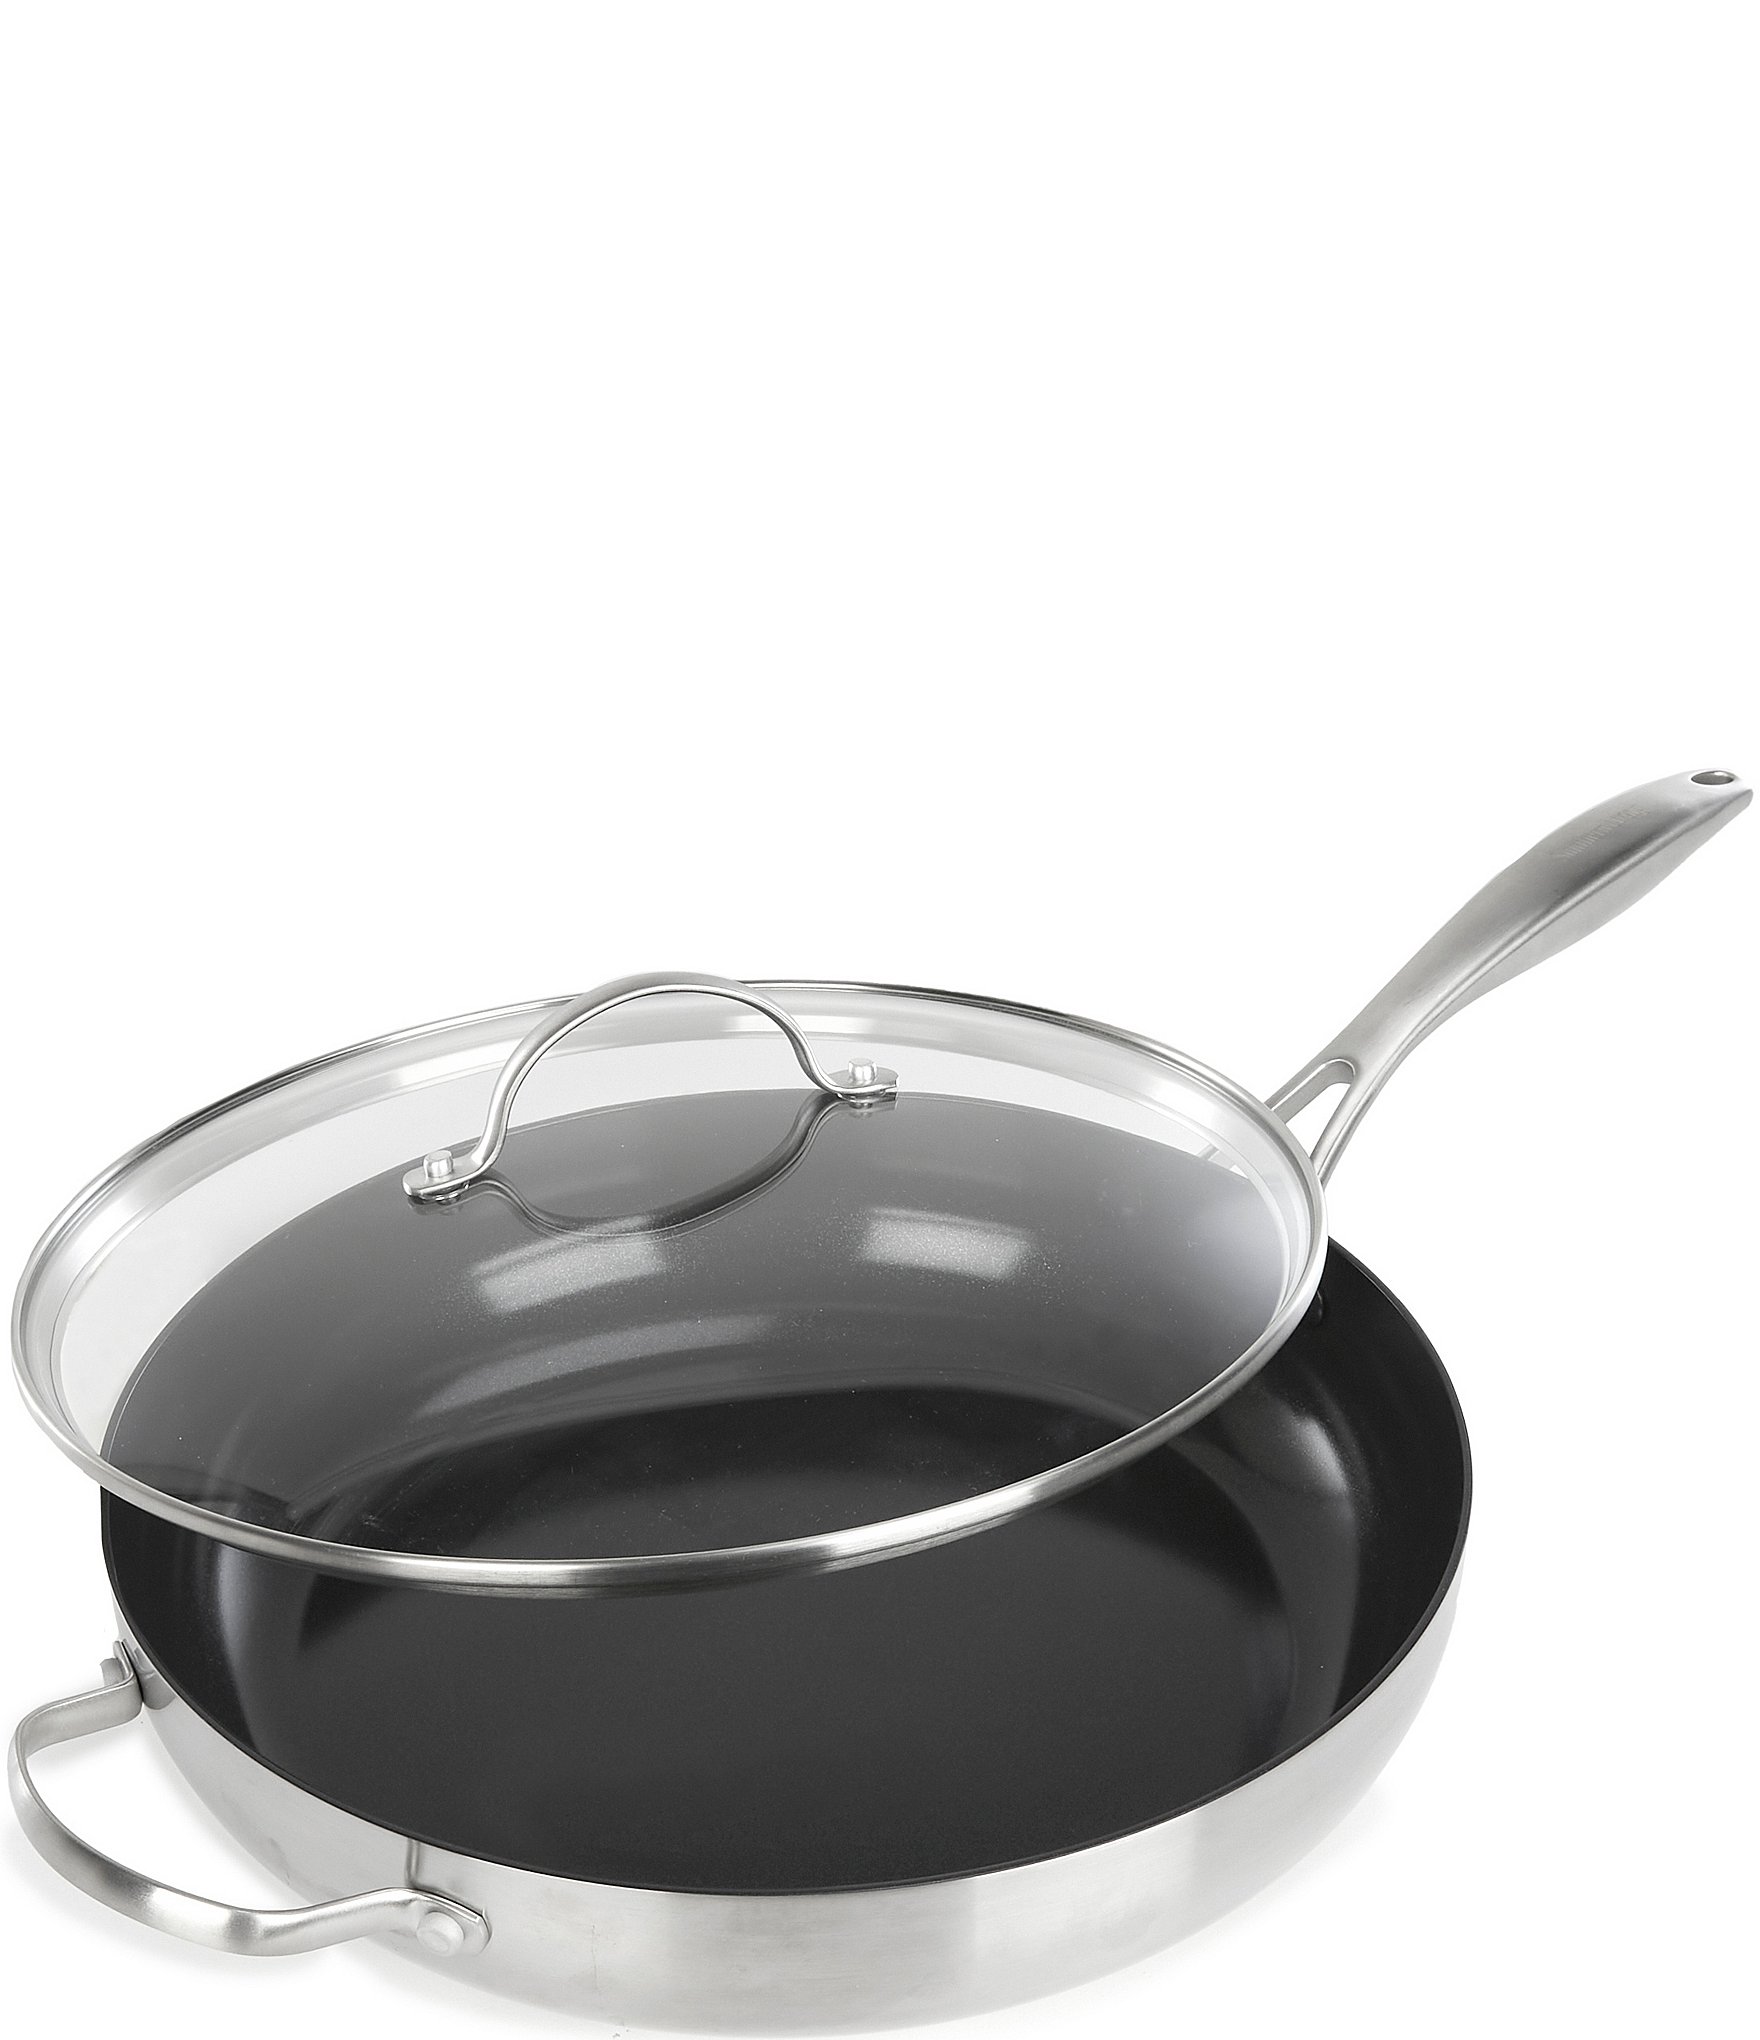 https://dimg.dillards.com/is/image/DillardsZoom/zoom/southern-living-by-greenpan-ceramic-nonstick-tri-ply-stainless-steel-12-inch-deep-skillet-with-glass-lid/00000002_zi_20425728.jpg